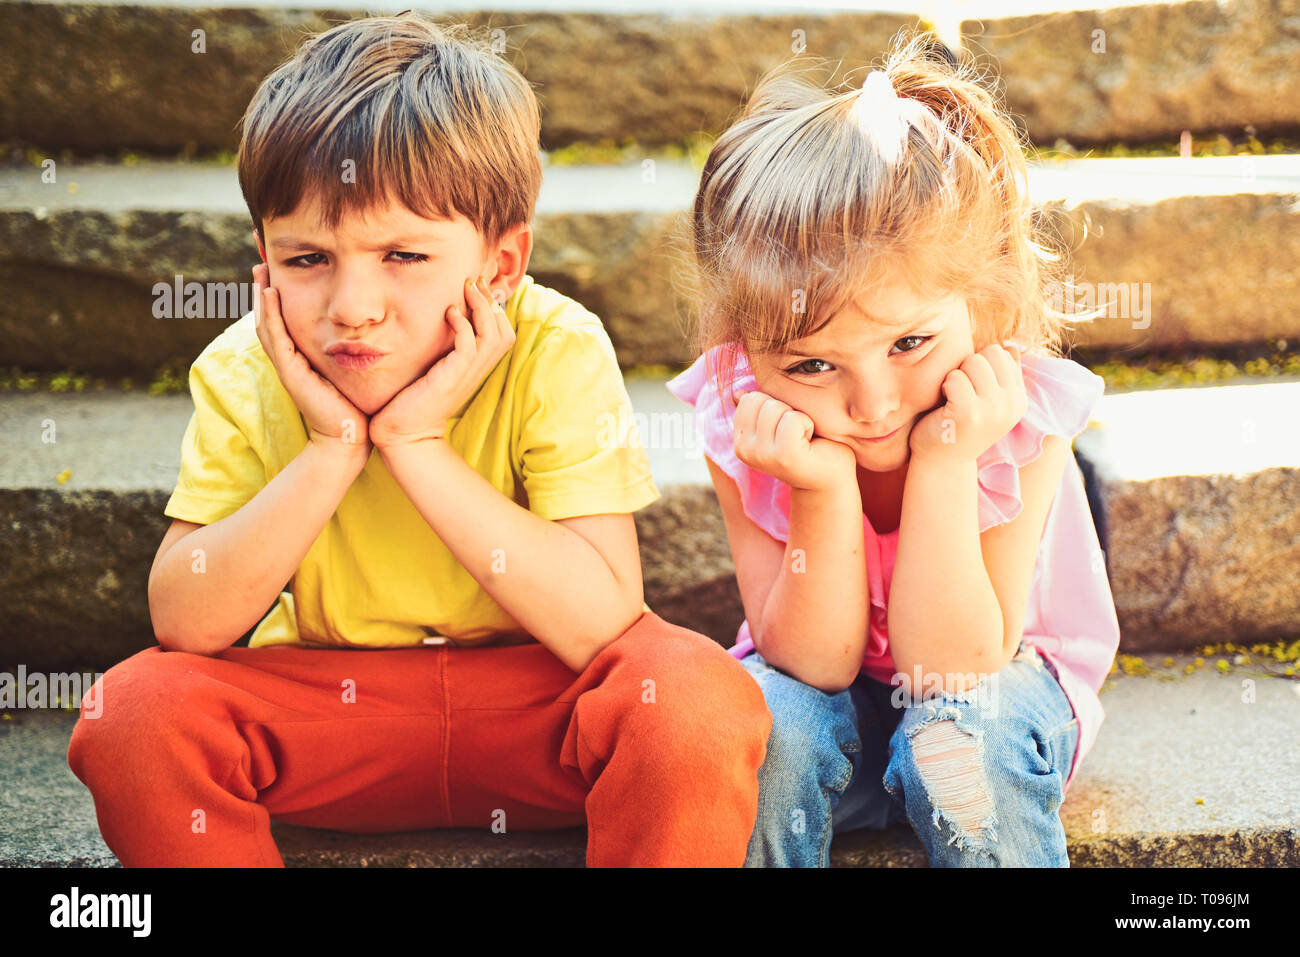 Summer Holiday Vacation Couple Of Little Children Boy And Girl Childhood First Love Best Friends Friendship And Family Values Small Girl And Boy Stock Photo Alamy